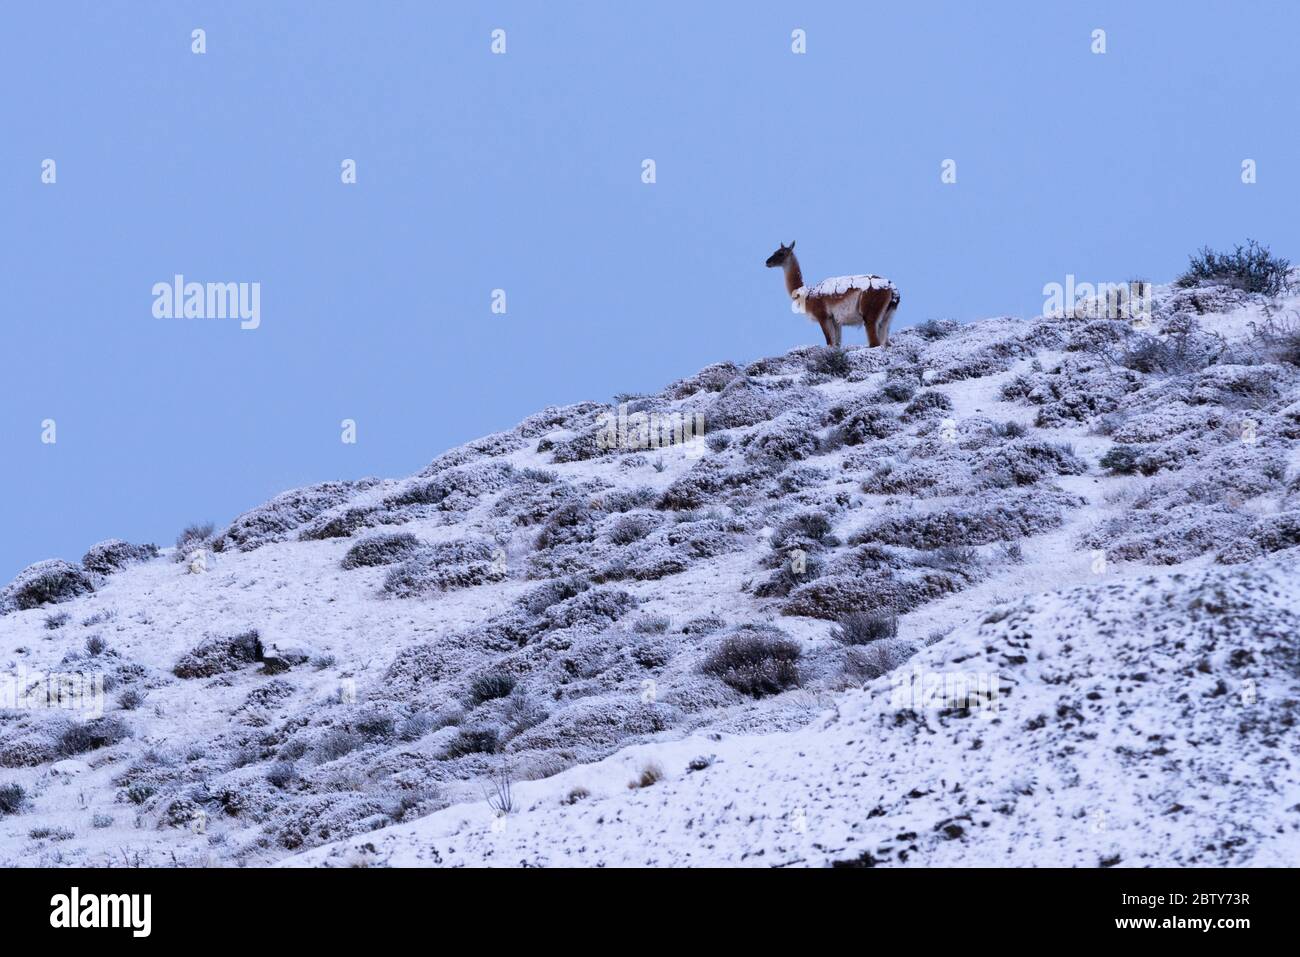 A Guanaco during a snowy winter day in Torres del Paine, Chile Stock Photo